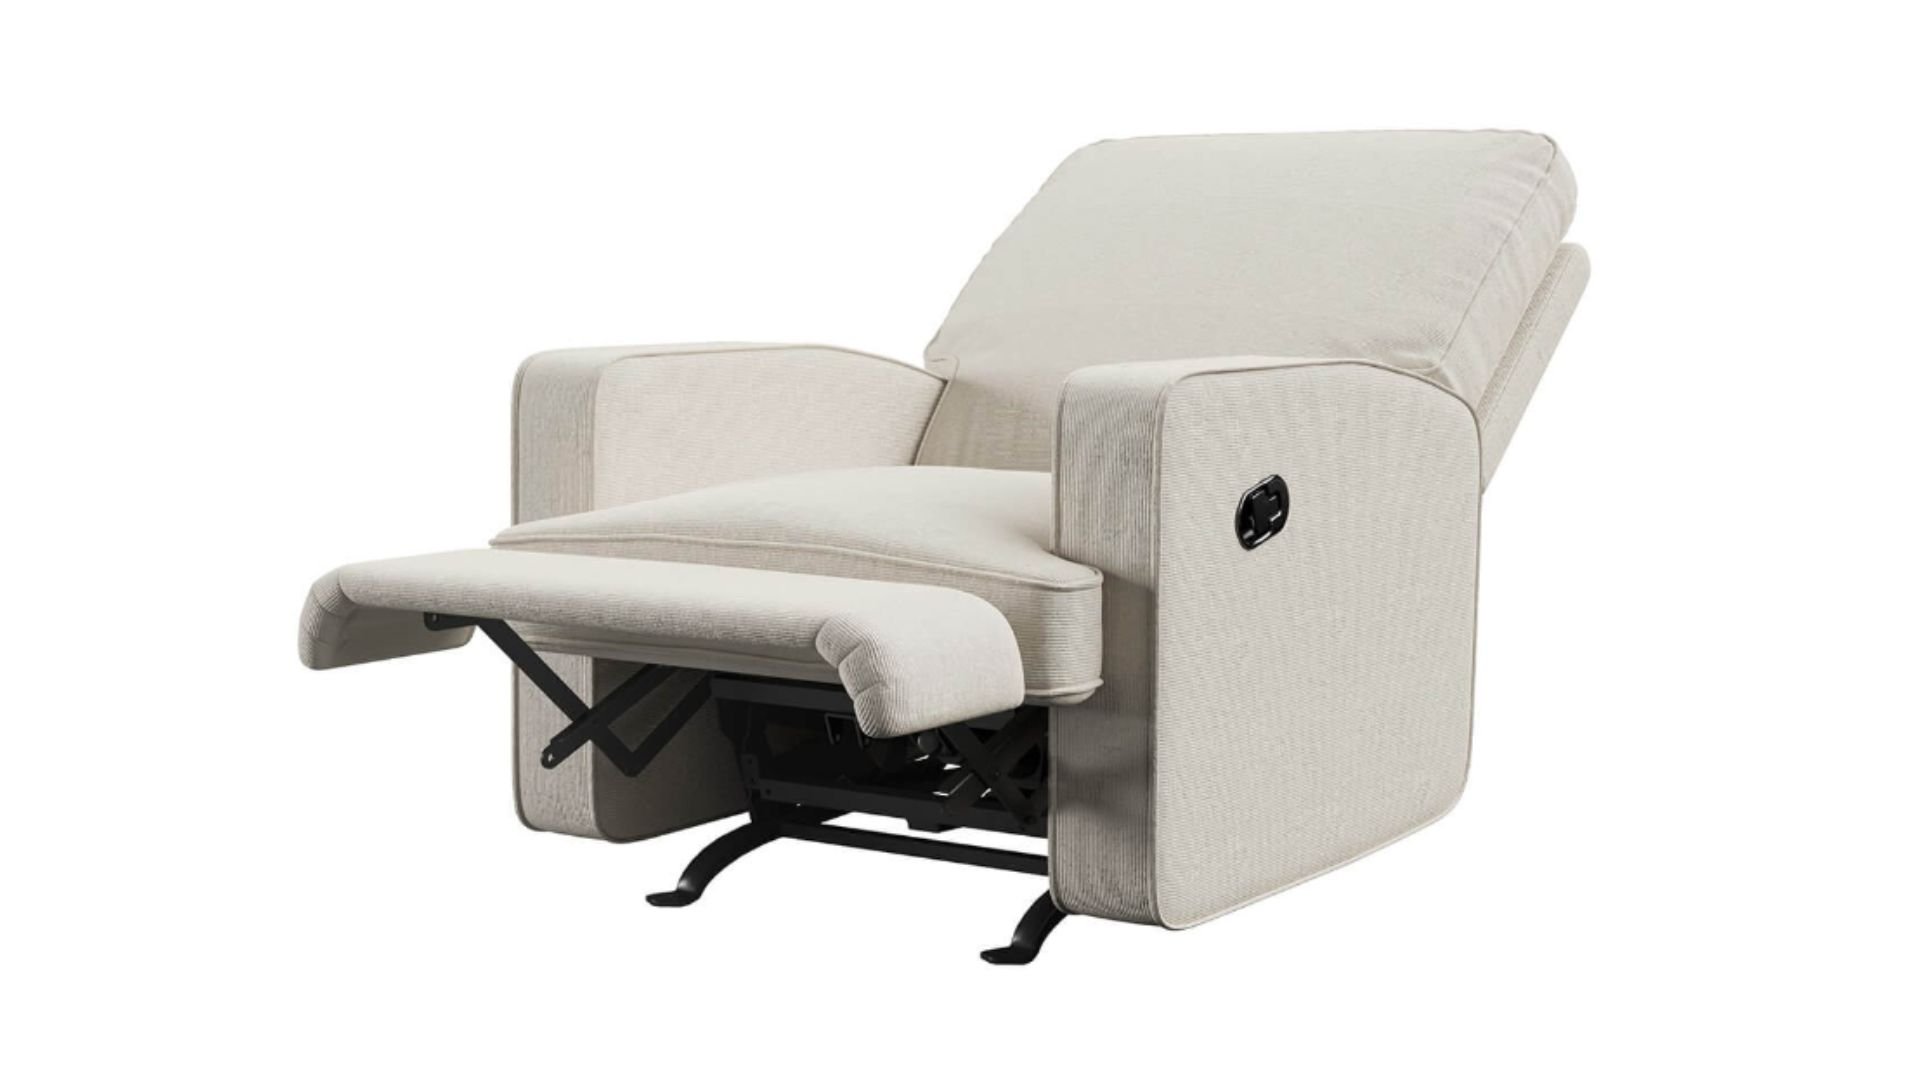 3D modeling for a reclining chair in a light beige fabric